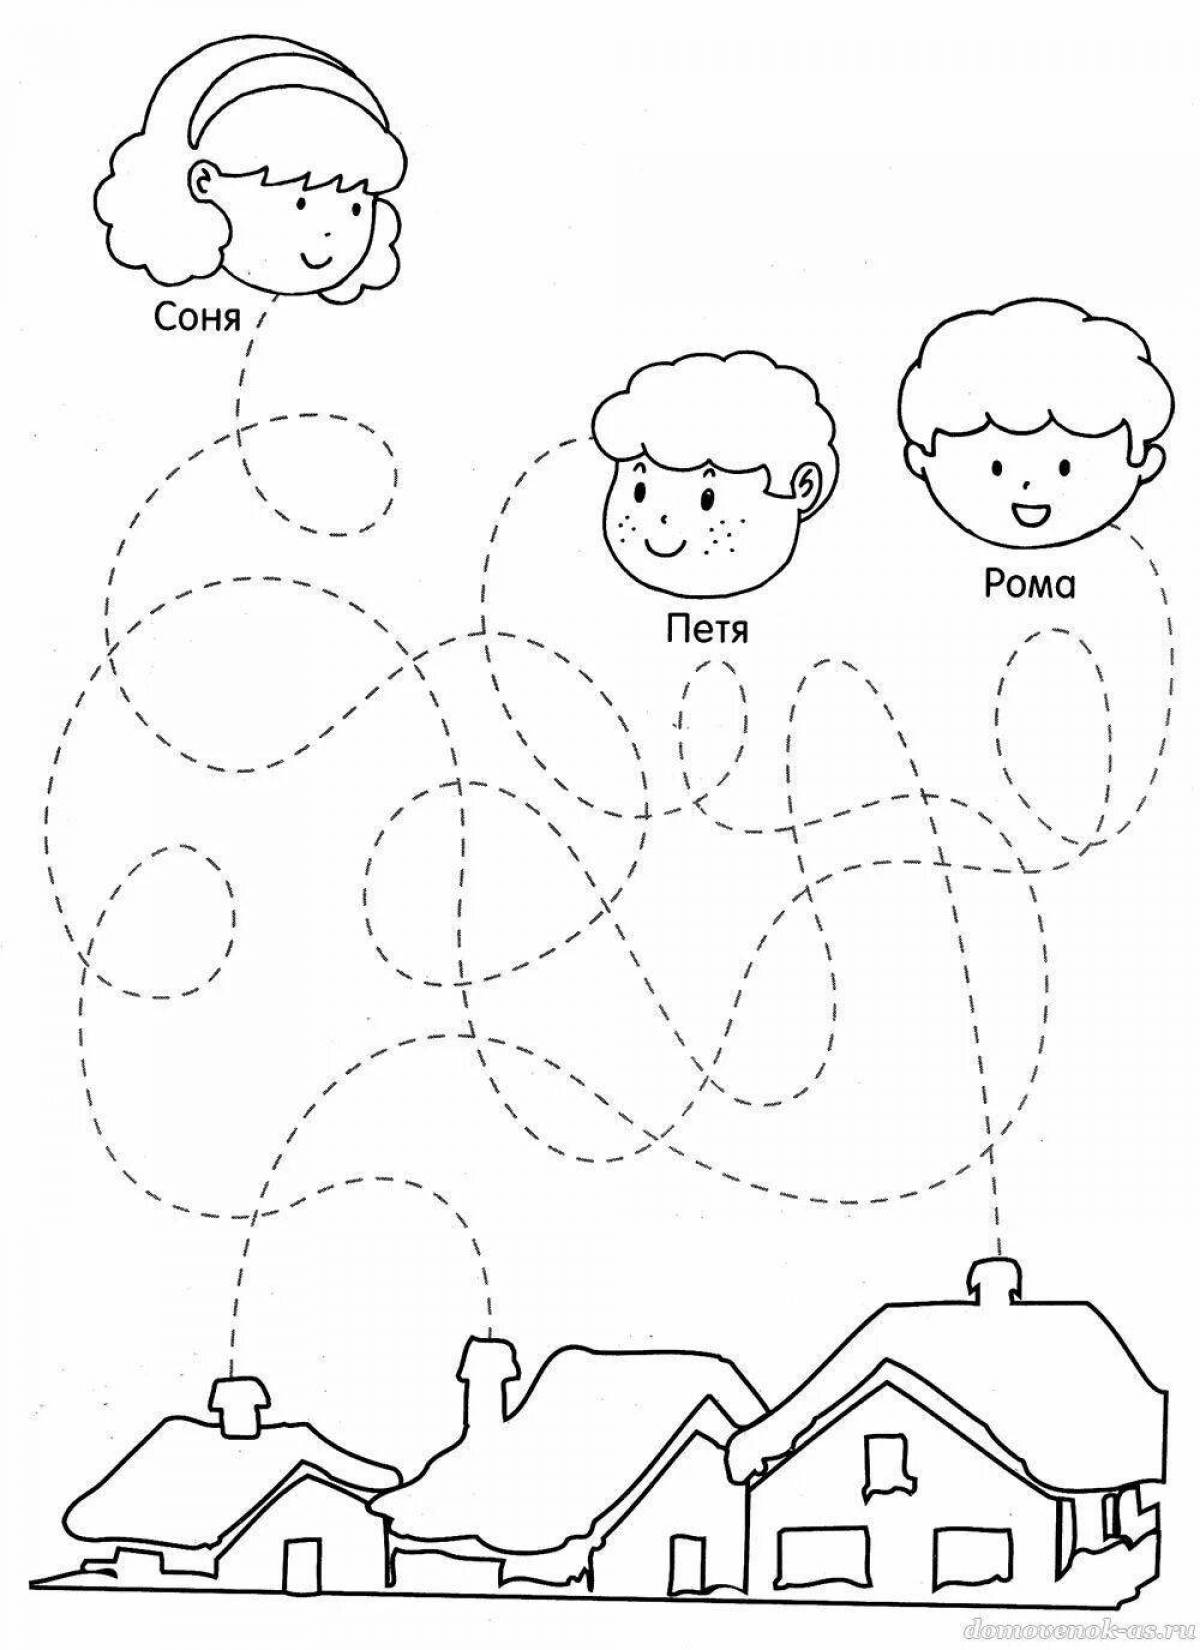 Fun coloring book for autistics 4 years old